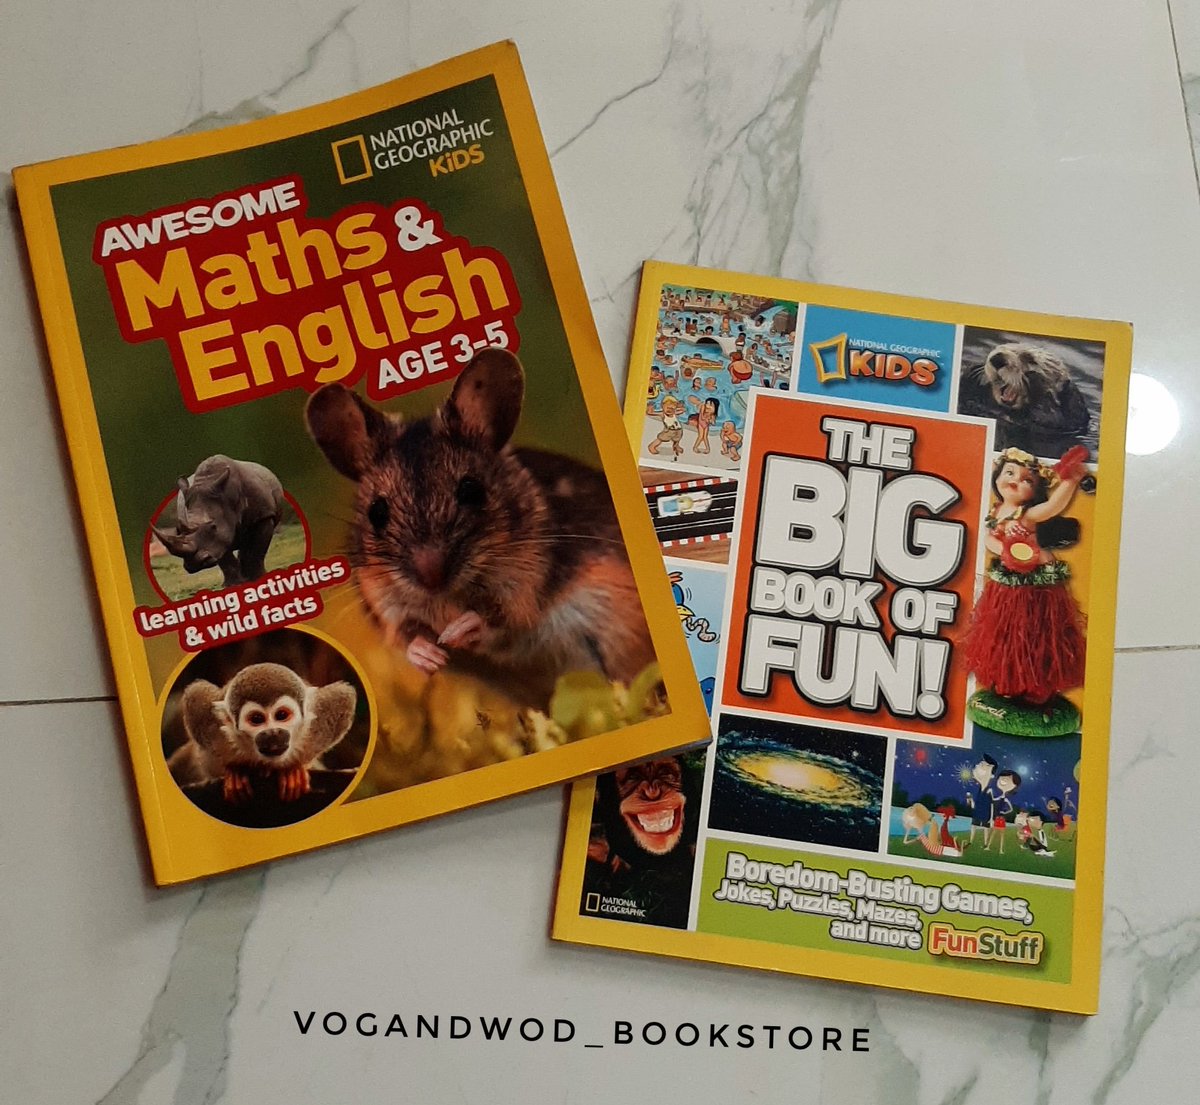 National Geographic kids *Awesome maths &English It’s time to get practising maths and English using this fun animal-themed activity book!Full of fun photos and amazing animal facts, 3-5 year-olds will get totally absorbed in counting, numbers, phonics, writing and lots more!